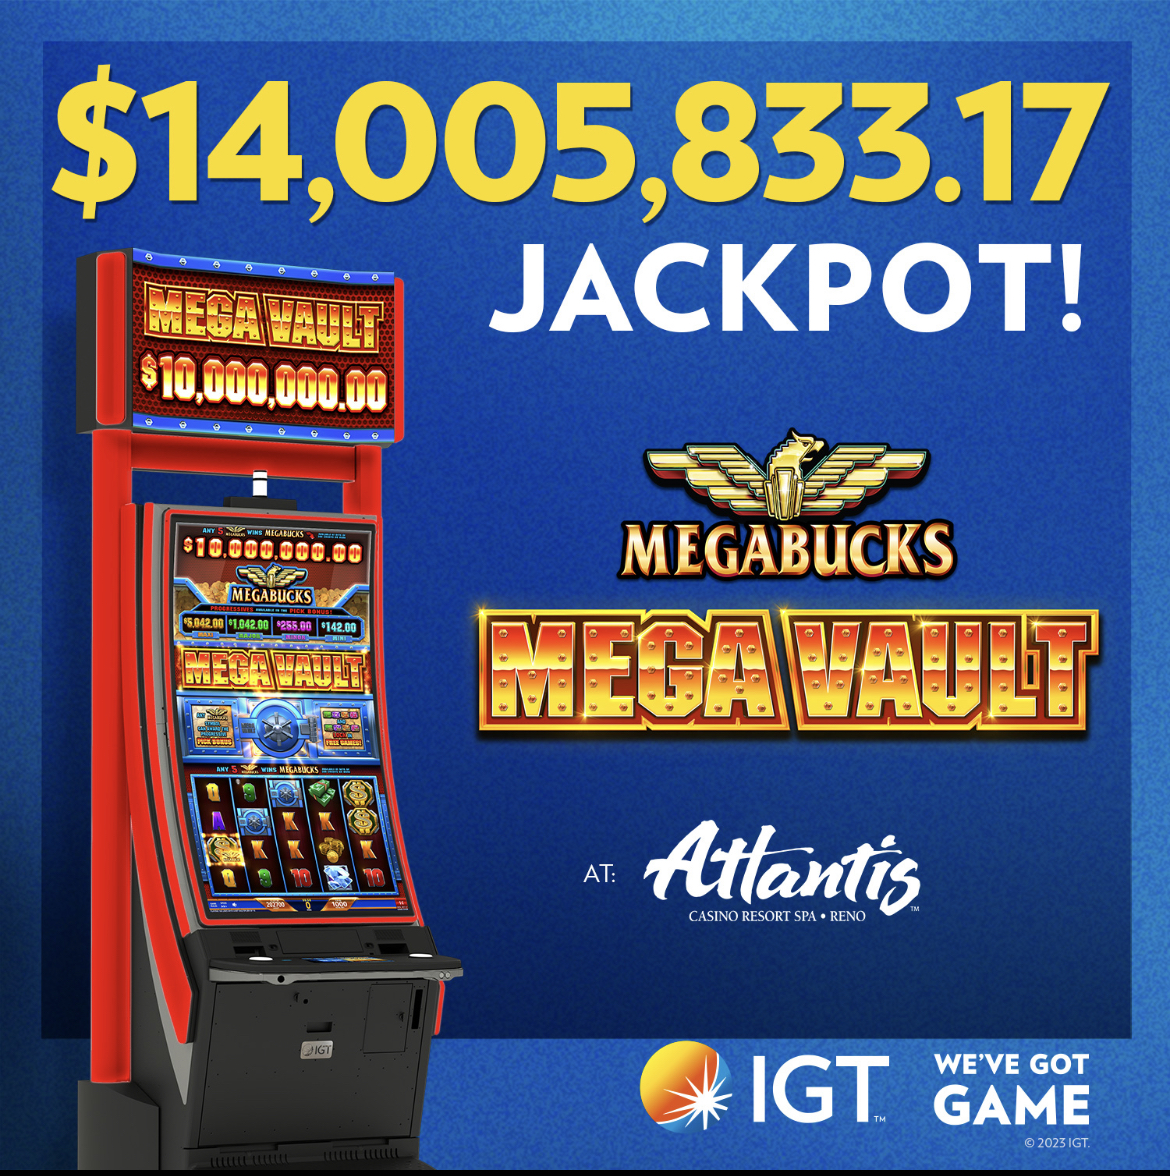 #TBT to this incredible 14 Million win on Megabucks™ Mega Vault™ Video Slots at  @AtlantisReno! This is the largest Megabucks™ win in Reno, Nevada history! Give your players the chance to win incredible jackpots